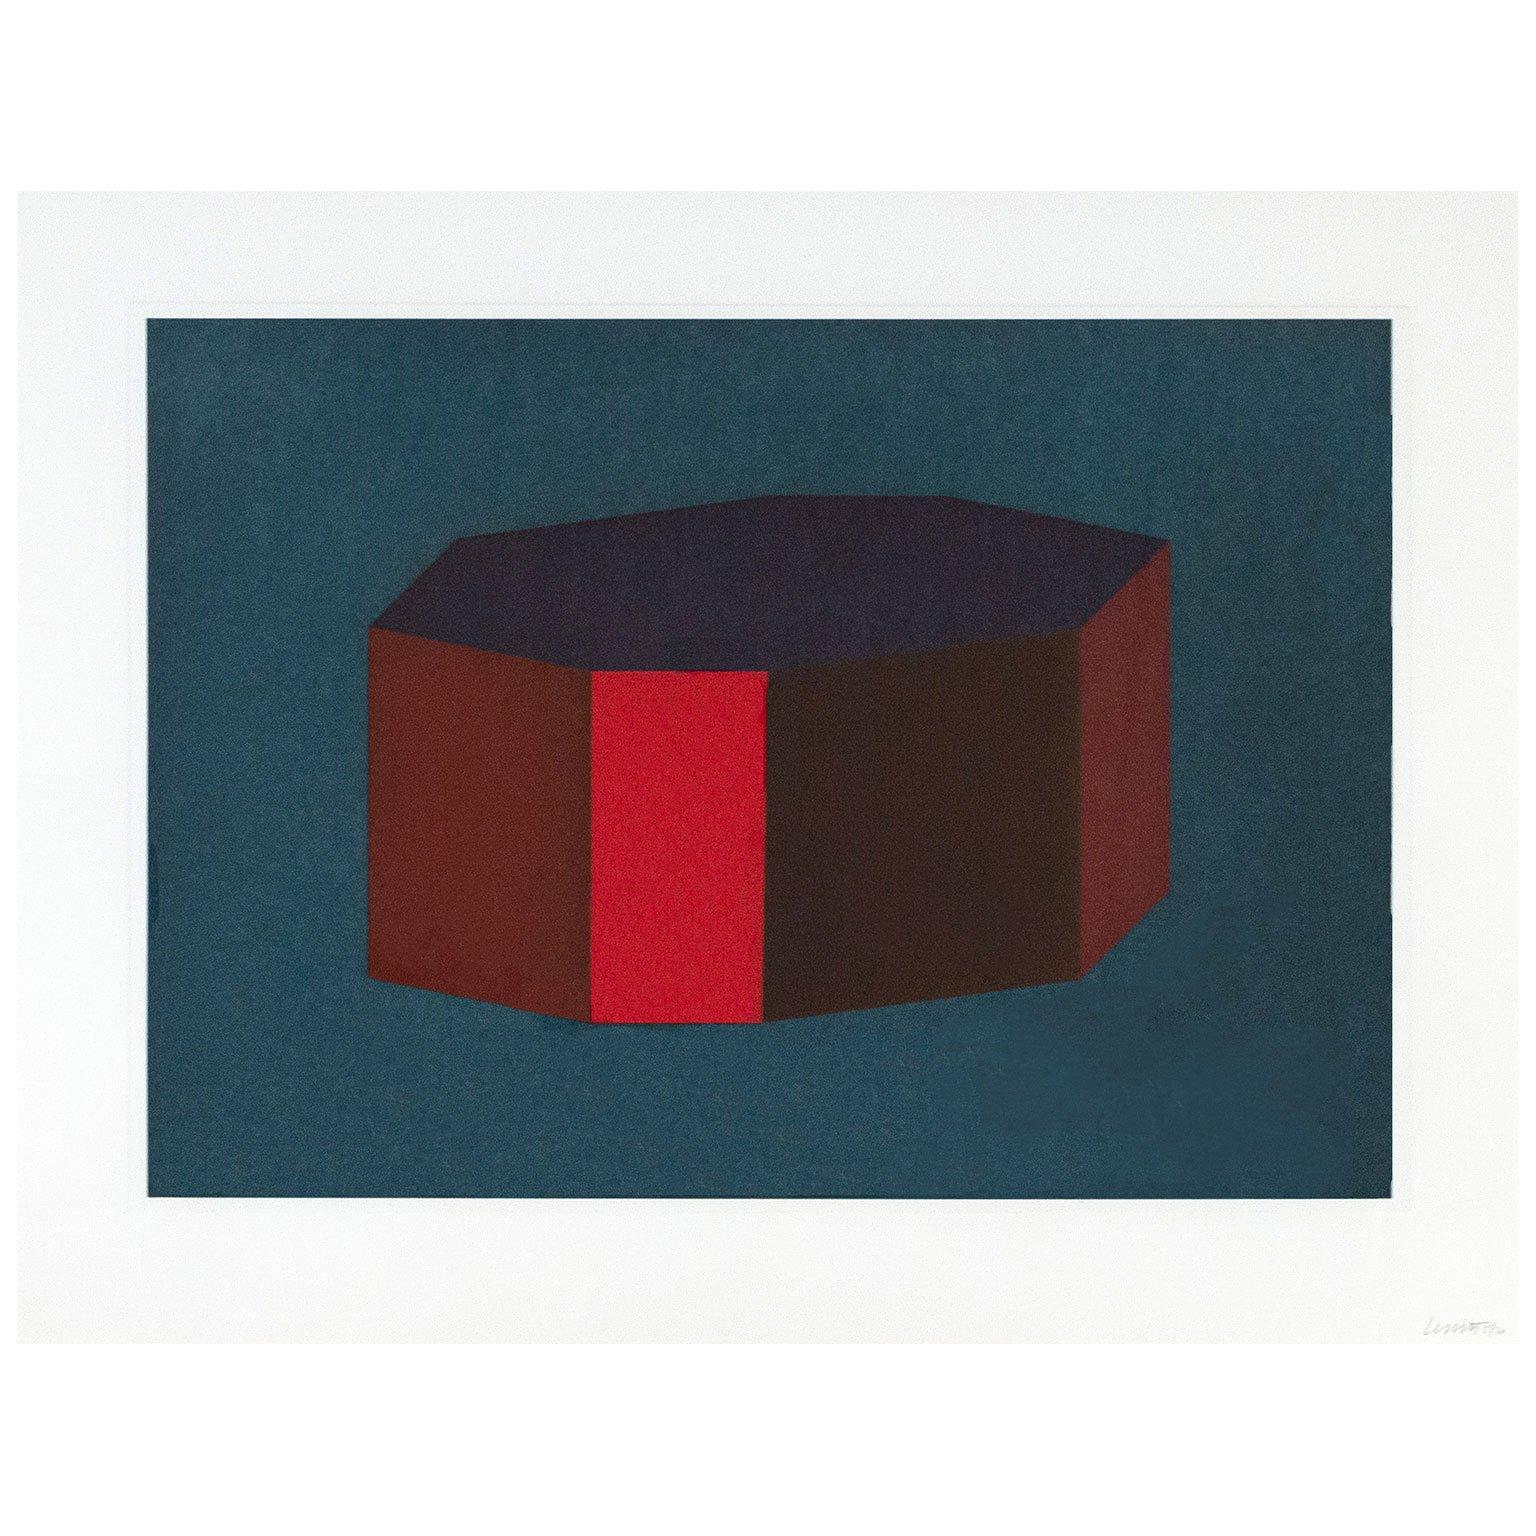 Forms Derived from a Cubic Rectangle, Plate #12 - Minimalist Print by Sol LeWitt